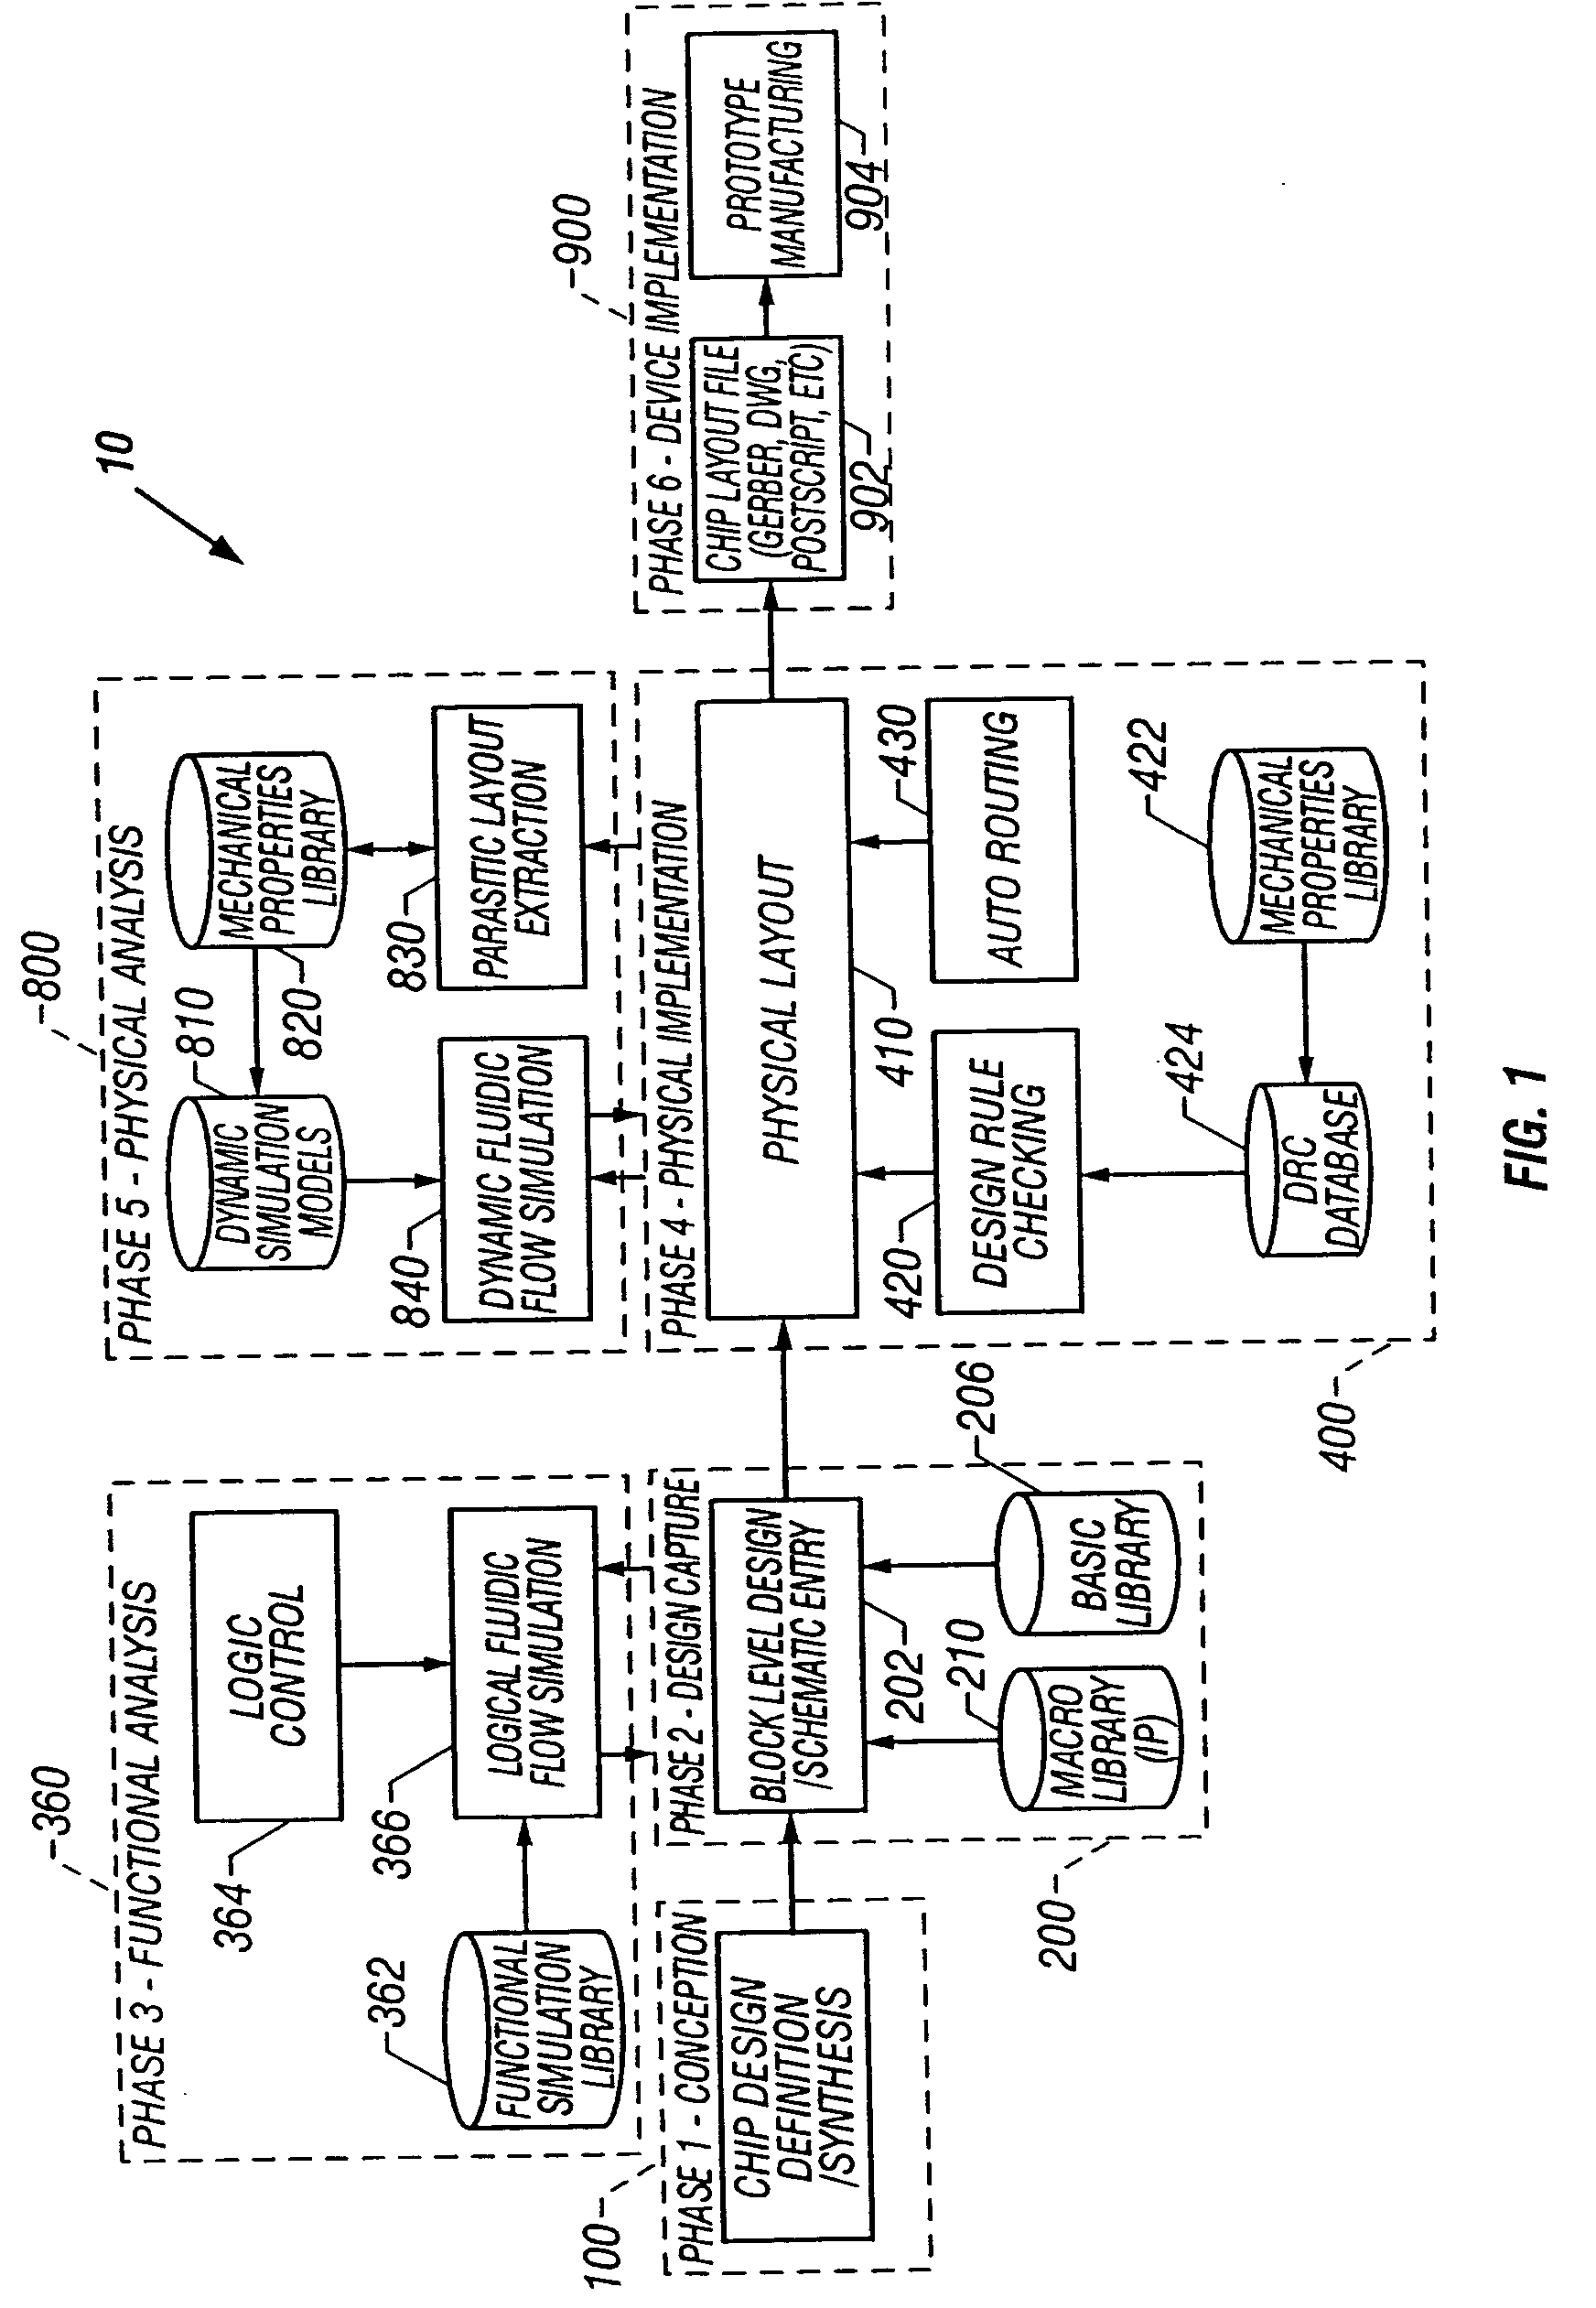 Object oriented microfluidic design method and system